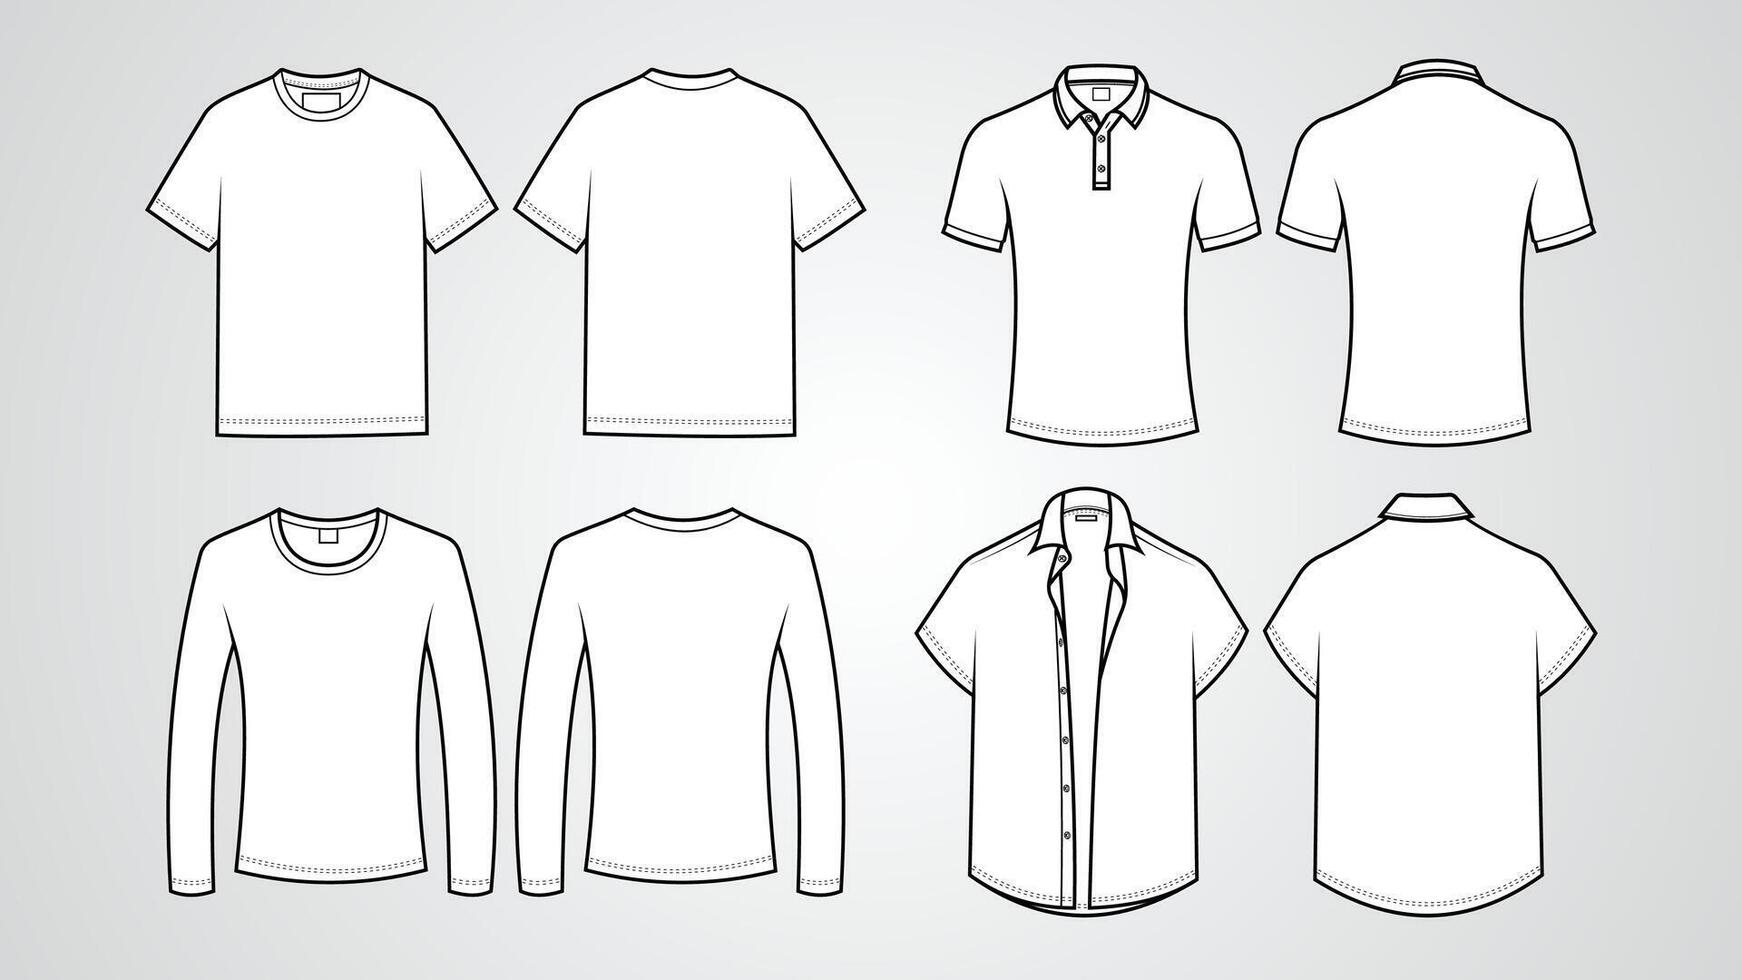 T-shirt mockups. Collection of technical models of t-shirts, long sleeves, polo collars and open shirts seen from the front and back. Isolated vector illustration